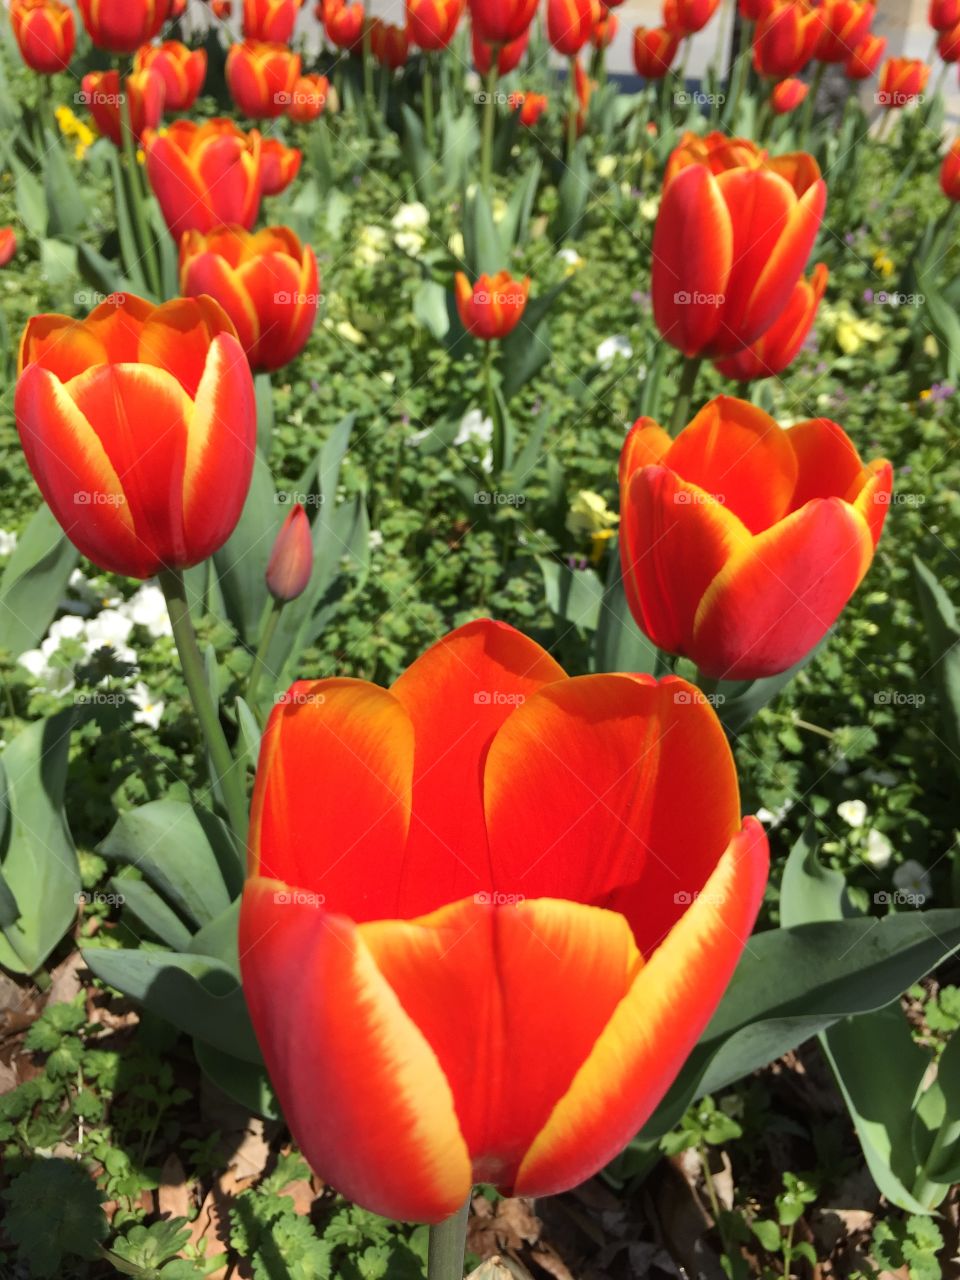 Spring is in the air & the tulips in bloom